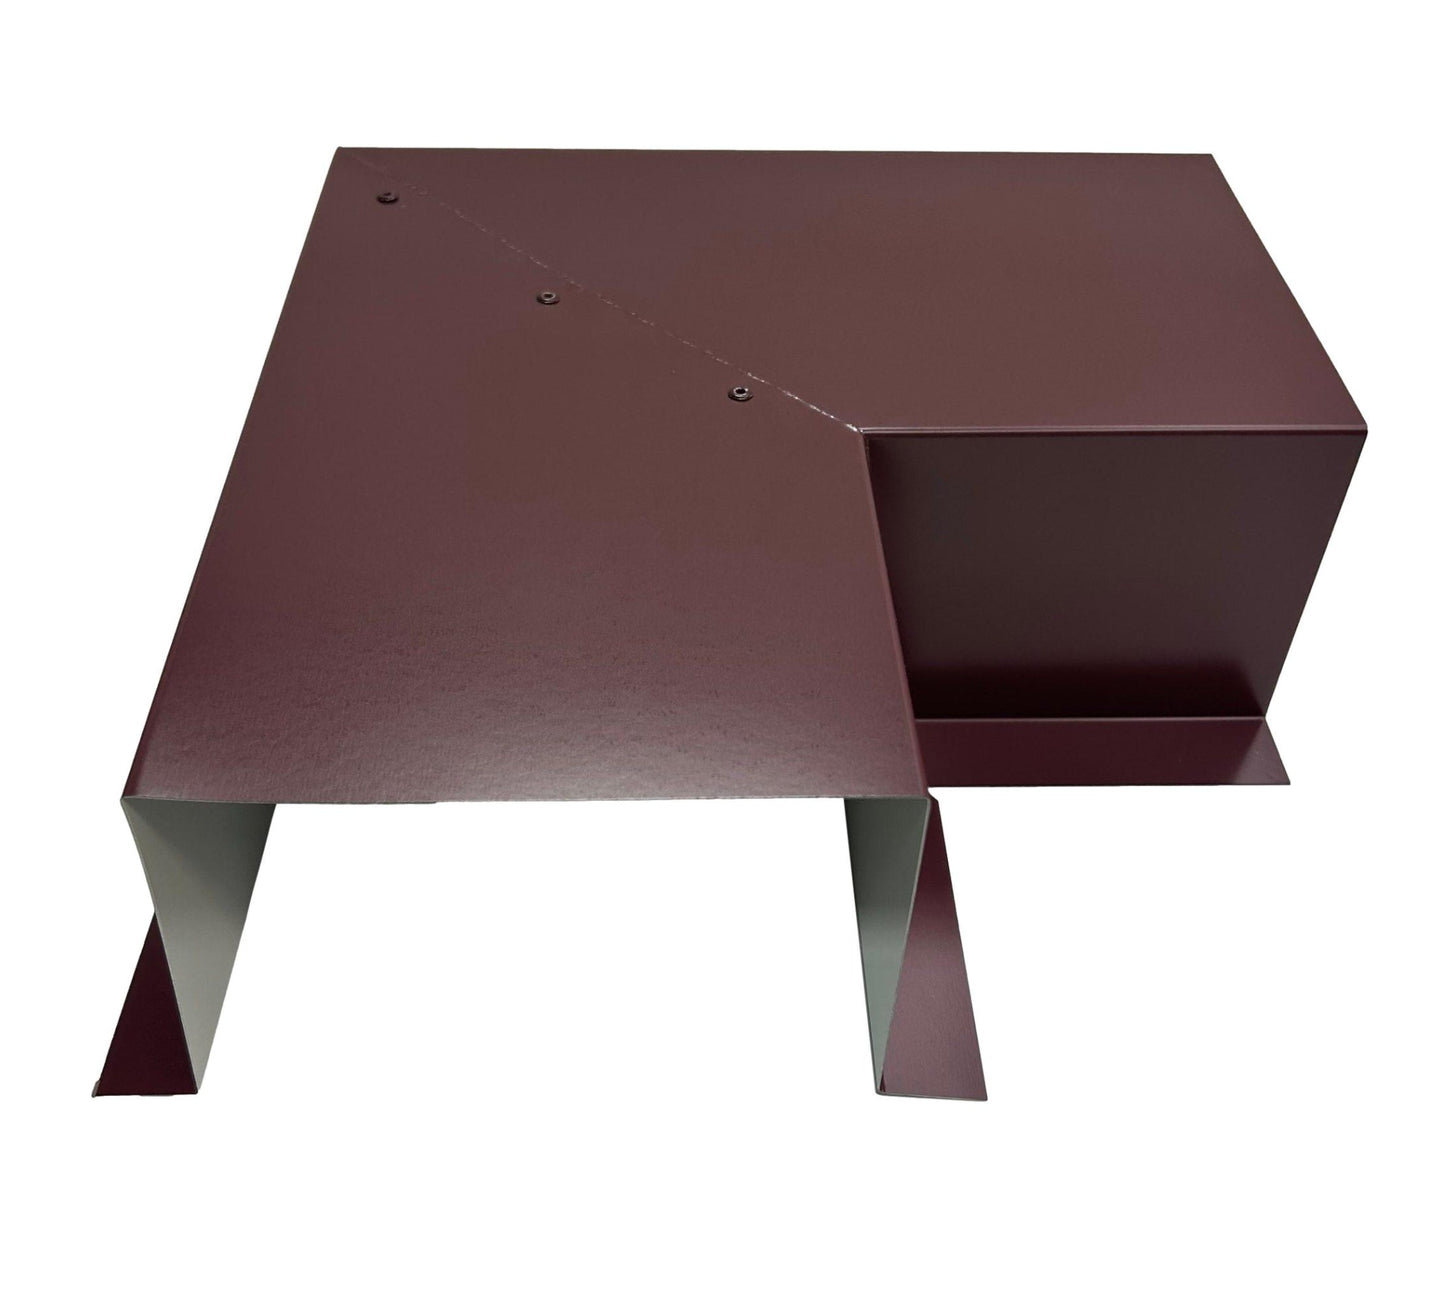 A maroon-colored, L-shaped metal fabrication piece with a flat top and two vertical sides of different lengths. Designed for easy installation, the piece has visible screws along the top surface and appears to be crafted for specific structural or construction use. Ideal for HVAC line sets. *Introducing the Perma Cover Residential Series - Line Set Cover Side Turning Elbows - Premium Quality.*